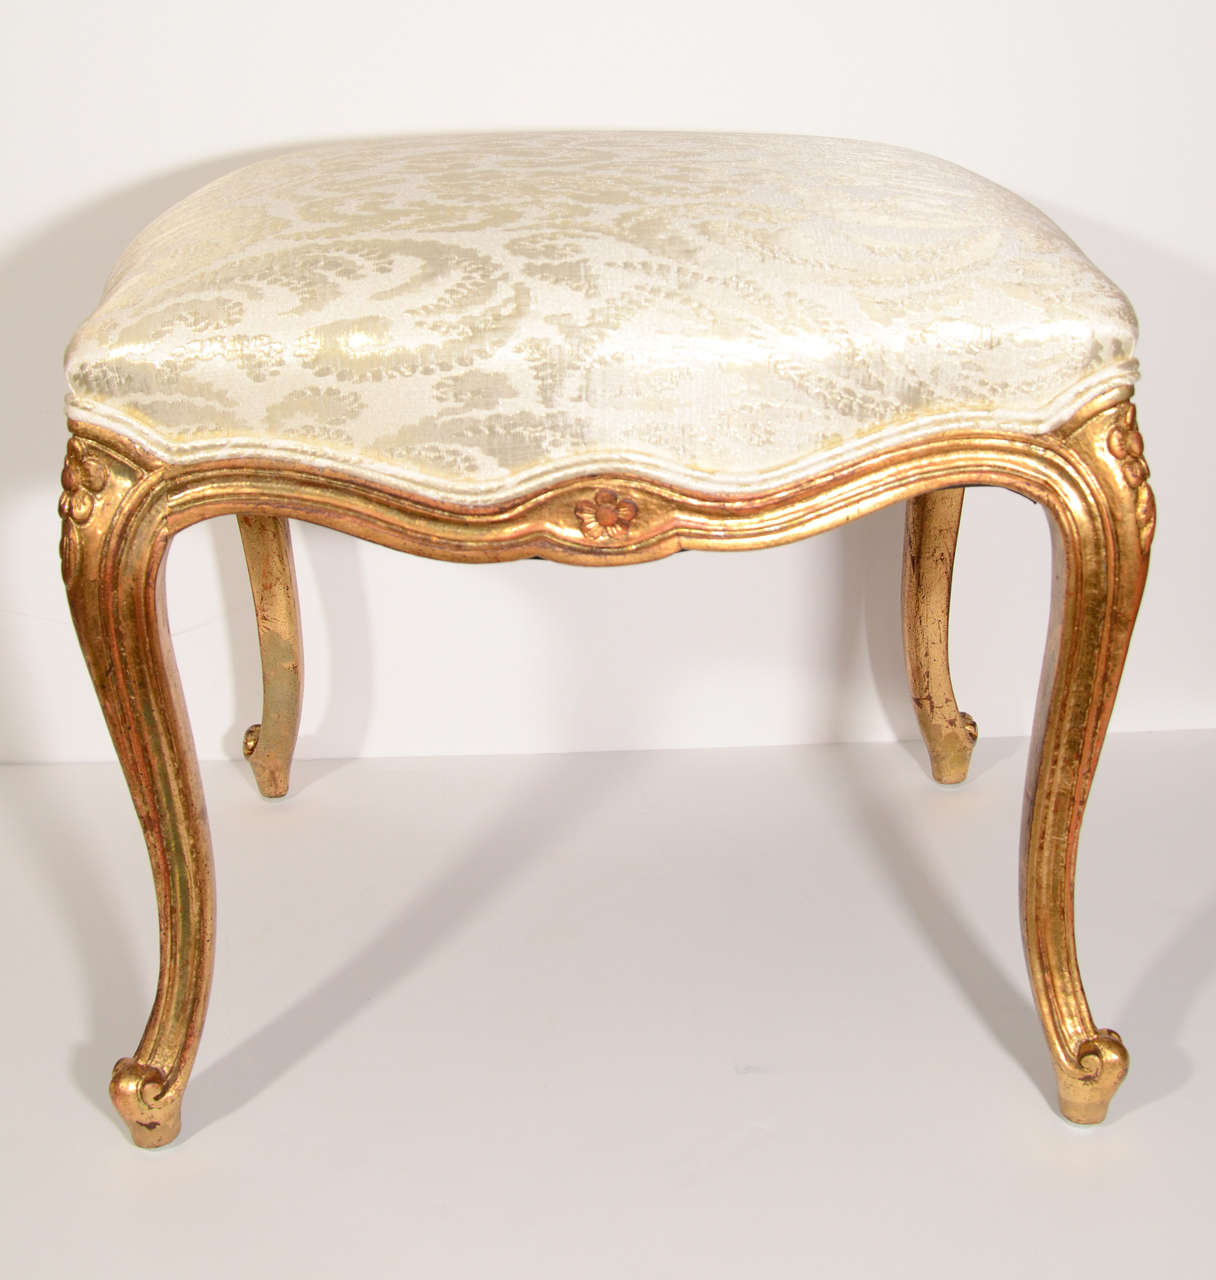 Beautiful Louis XV style bench with antiqued gilt wood base and legs. The legs are hand carved with fluted design and floral details. Newly upholstered in scalamandre silk fabric with gold damask print.  There are two benches available and can also